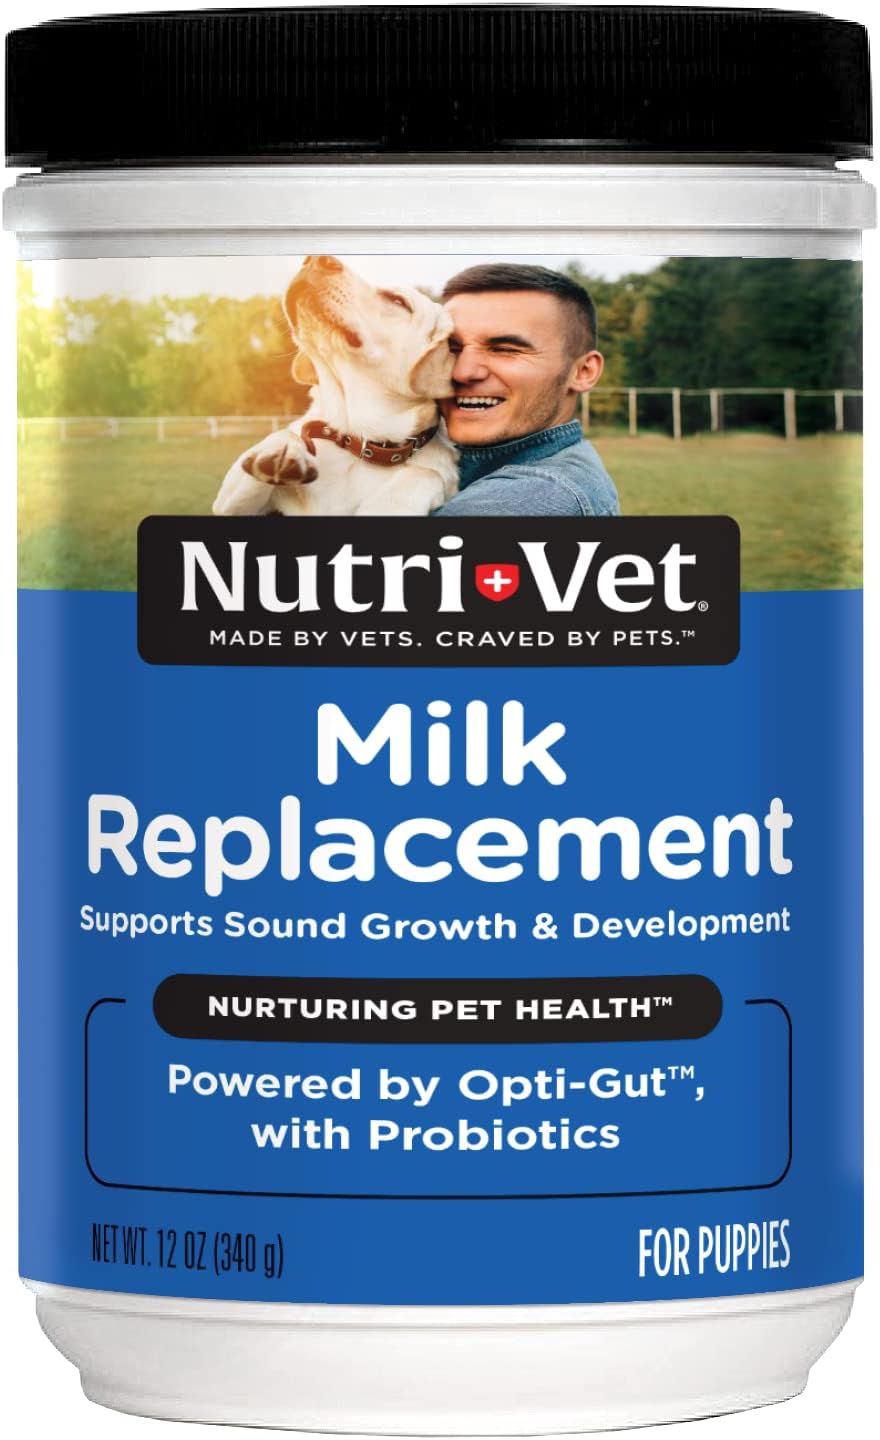 Nutri-Vet Milk Replacement For Puppies | Healthy Gut Support with Probiotics | 12 Ounces (Packaging May Vary)